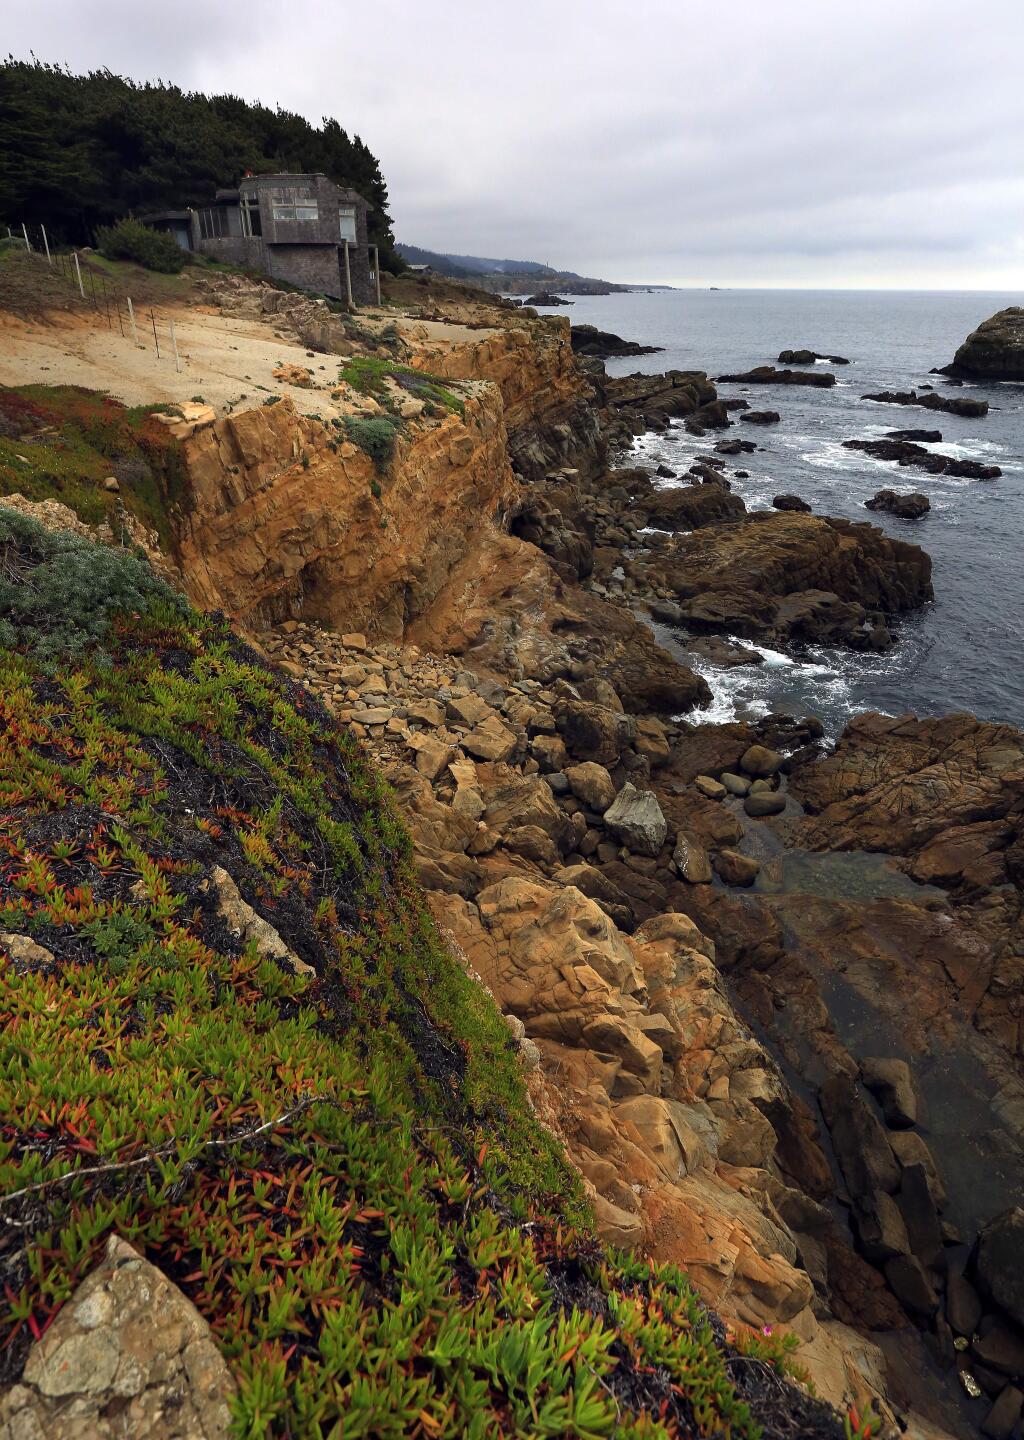 The coastal trail out of Stillwater Cove will run along Highway 1 where housing developments run to the ocean bluffs. Sonoma County Regional Parks is proposing a 3-mile trail connecting Stillwater Cove Regional Park and Ft. Ross State Historic Park. (JOHN BURGESS/ PD)